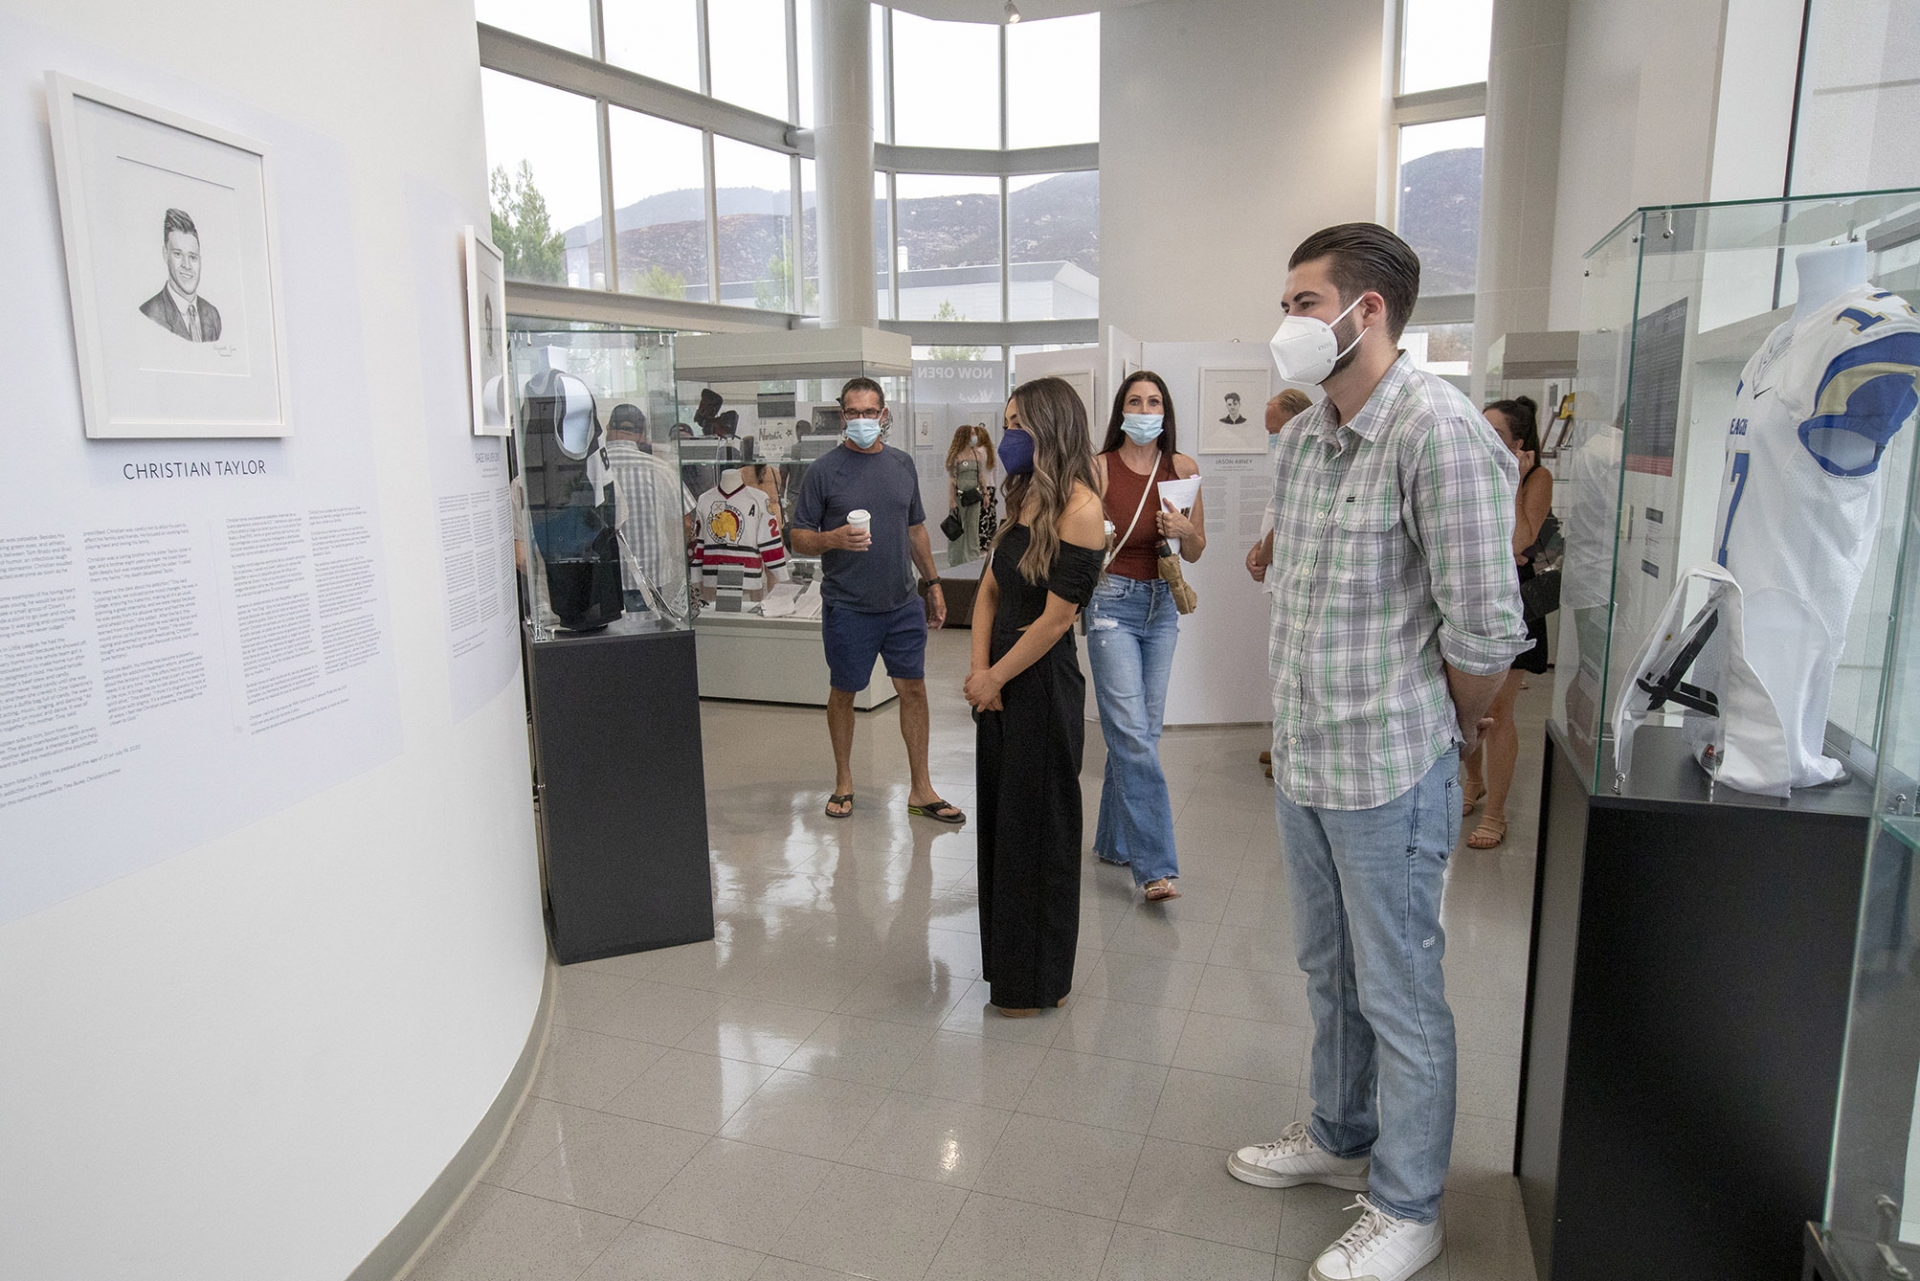 The INTO LIGHT Project’s California exhibit opened at CSUSB’s Anthropology Museum in September. The exhibition closes to the public on Saturday, June 10, with special weekend viewing hours from 8-11:30 a.m. Admission is free.